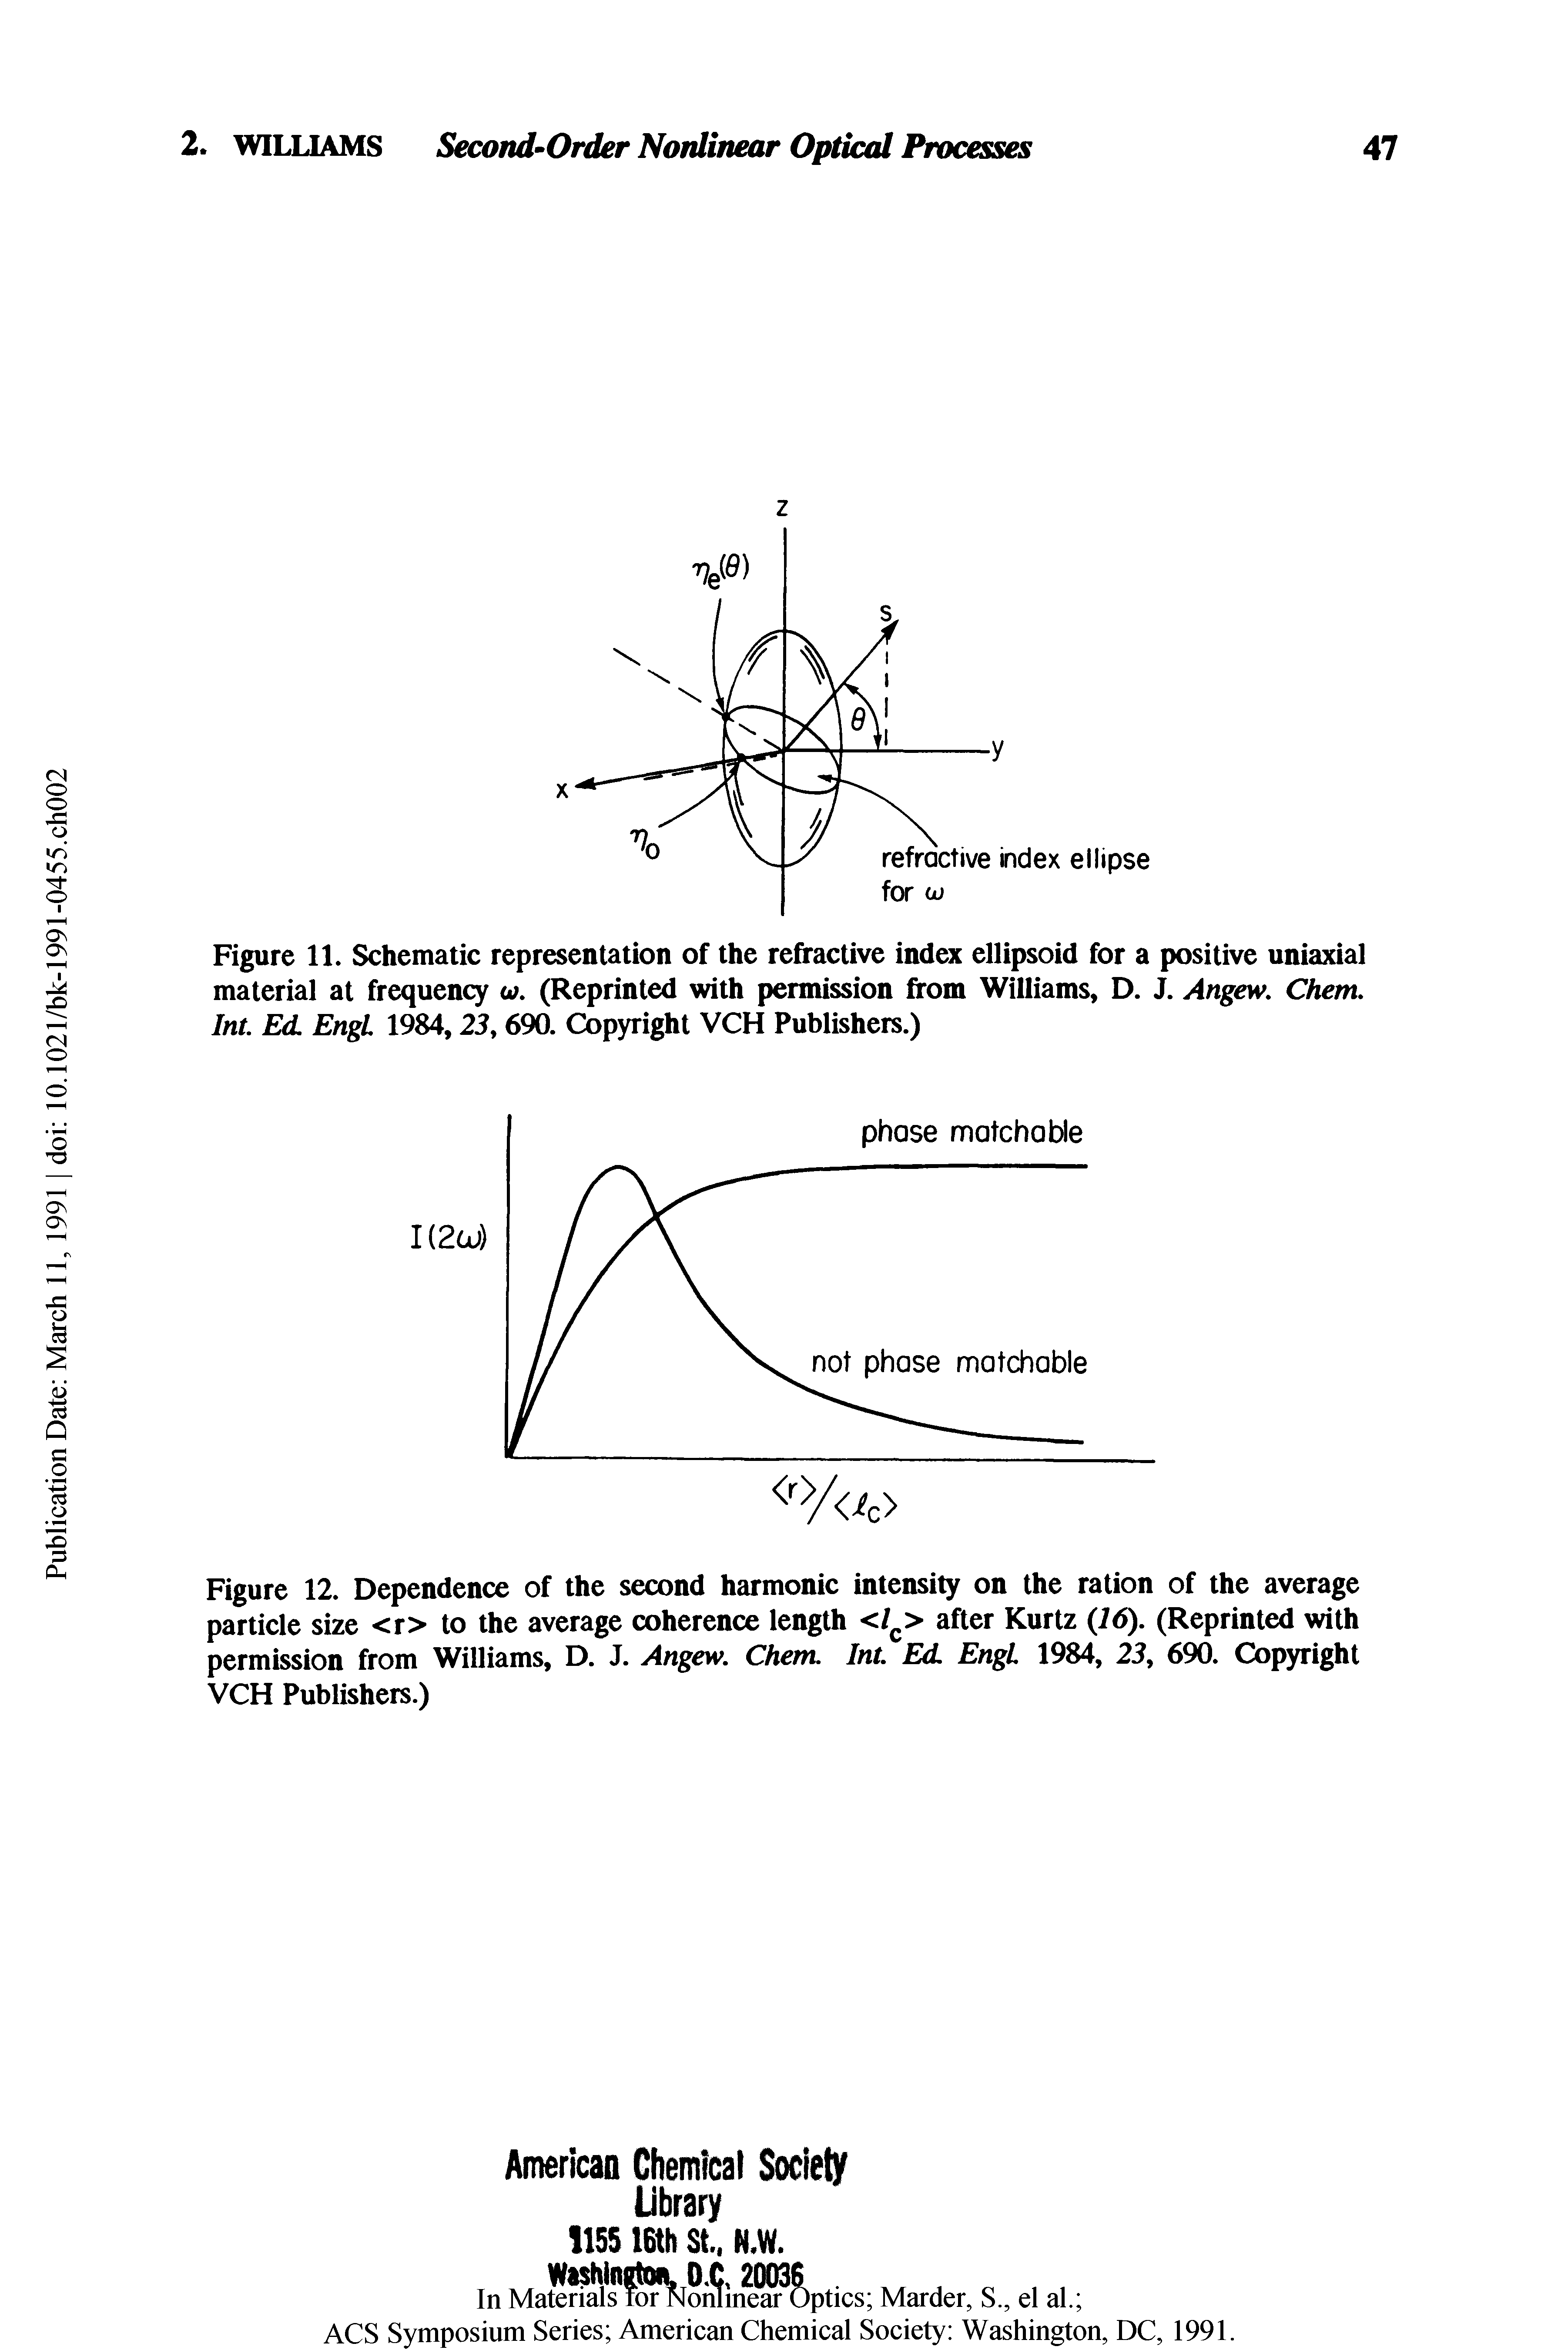 Figure 11. Schematic representation of the refractive index ellipsoid for a positive uniaxial material at frequency w. (Reprinted with permission from Williams, D. J. Atigew. Chem. Int. Ed. Engl 1984,23,690. Copyright VCH Publishers.)...